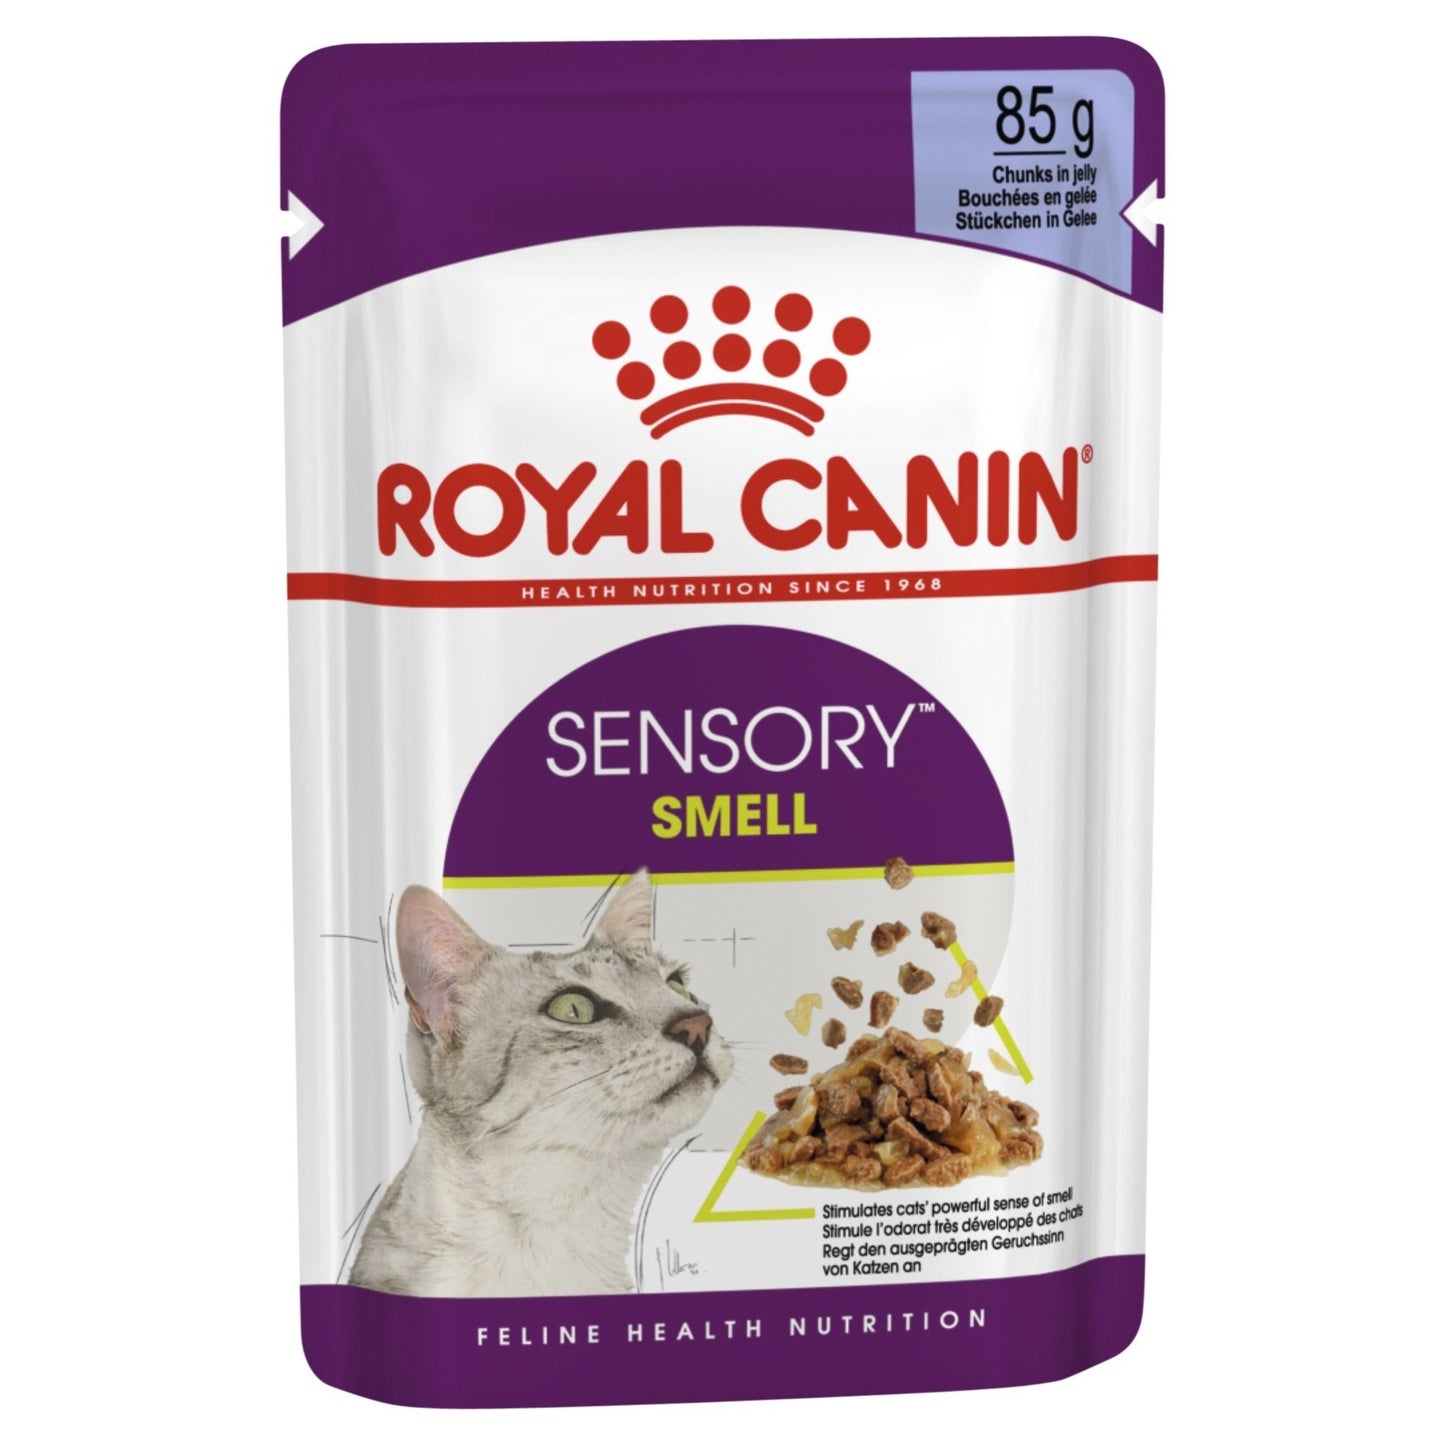 Royal Canin Cat Wet Food Pouch Sensory Smell Jelly 85g - Woonona Petfood & Produce